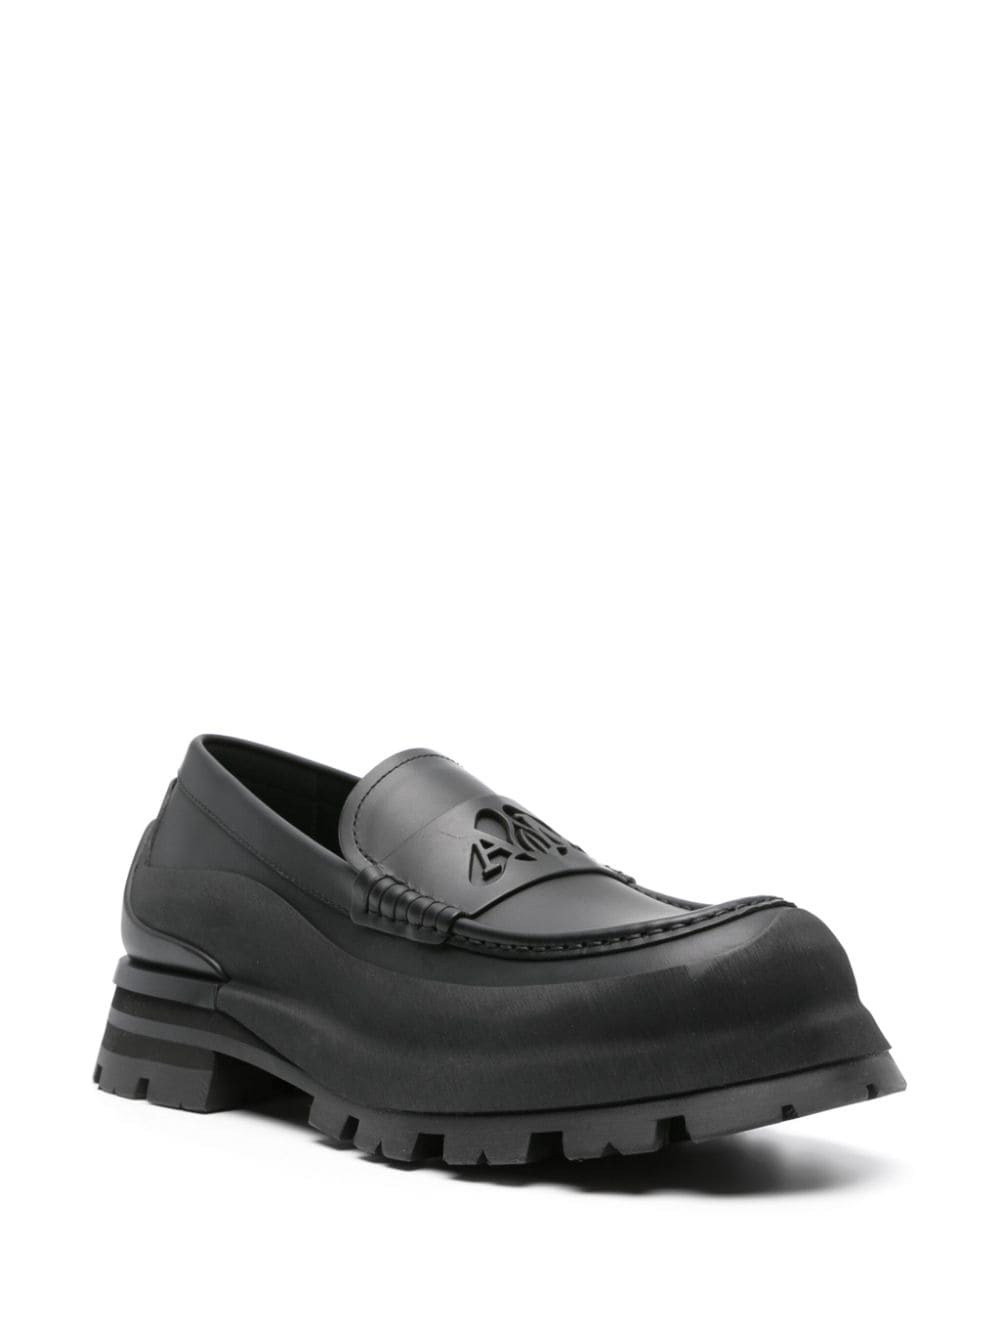 Image 2 of Alexander McQueen Seal-logo leather loafers